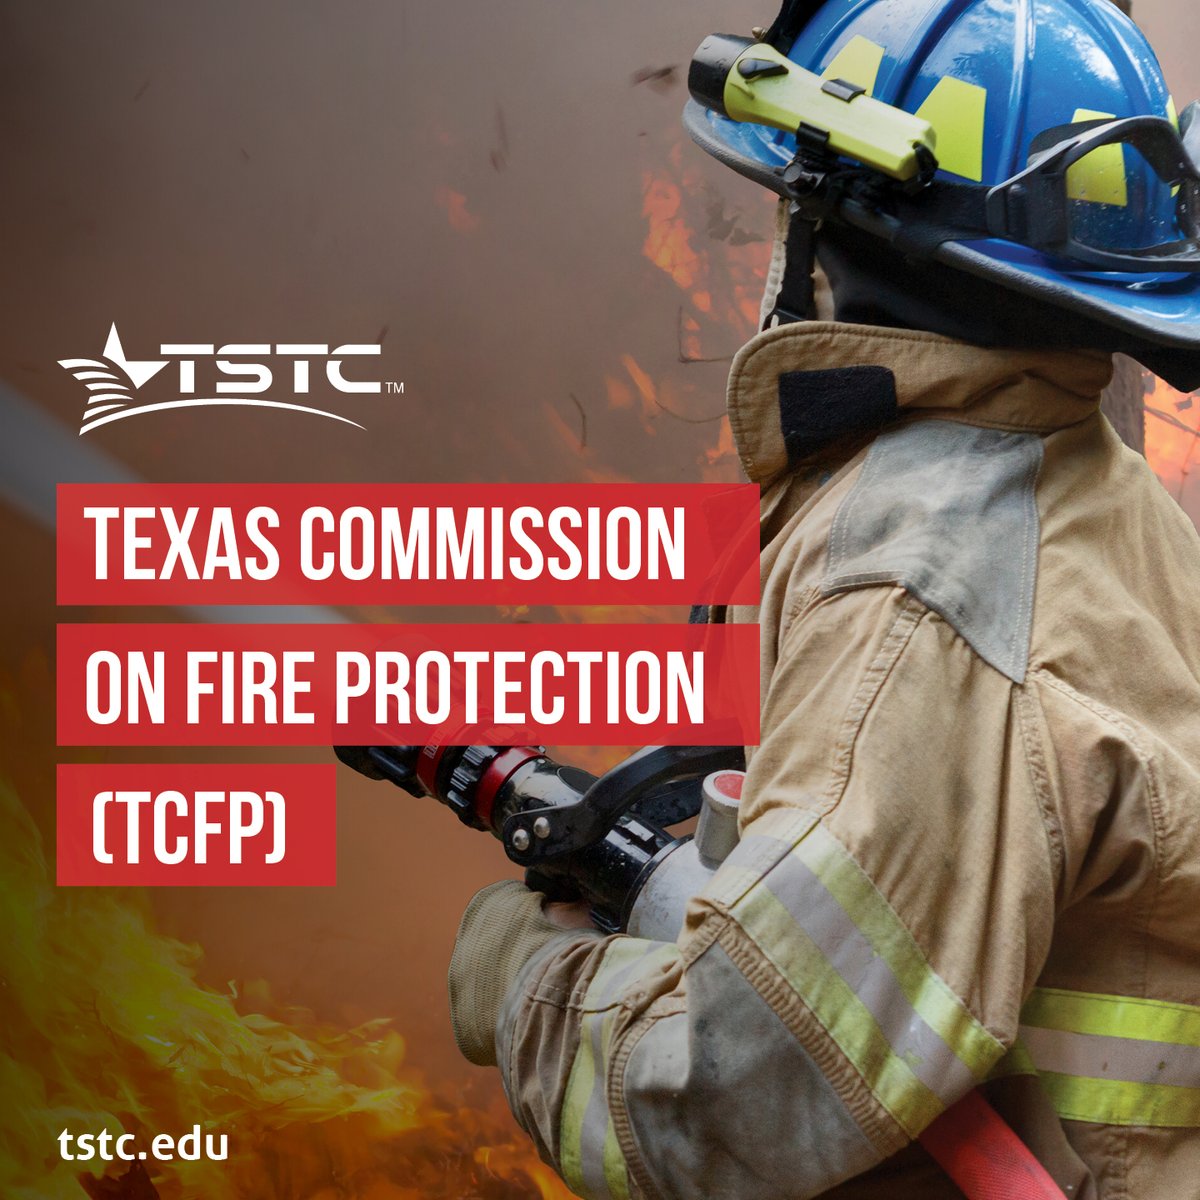 Texas Commission on Fire Protection (TCFP): State law requires fire protection personnel to be certified by the commission. Exams include Aircraft Rescue Firefighter, Basic Fire Inspector, Basic Wildland Firefighter, Fire Officer, Firefighter, Hazardous Materials Awareness, ...